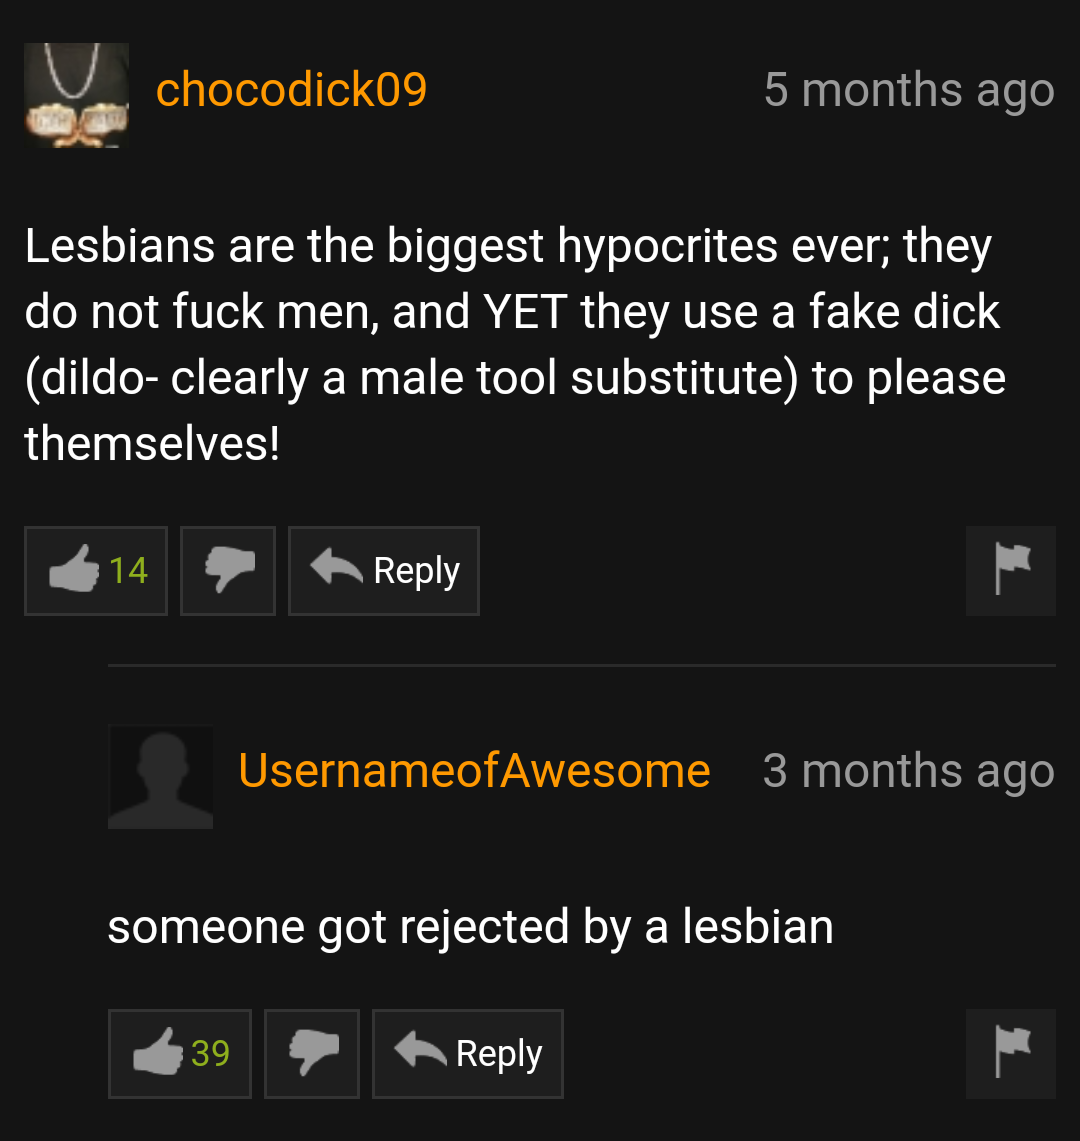 preston garvey pornhub - chocodickog 5 months ago Lesbians are the biggest hypocrites ever; they do not fuck men, and Yet they use a fake dick dildo clearly a male tool substitute to please themselves! 2 14 UsernameofAwesome 3 months ago someone got rejec